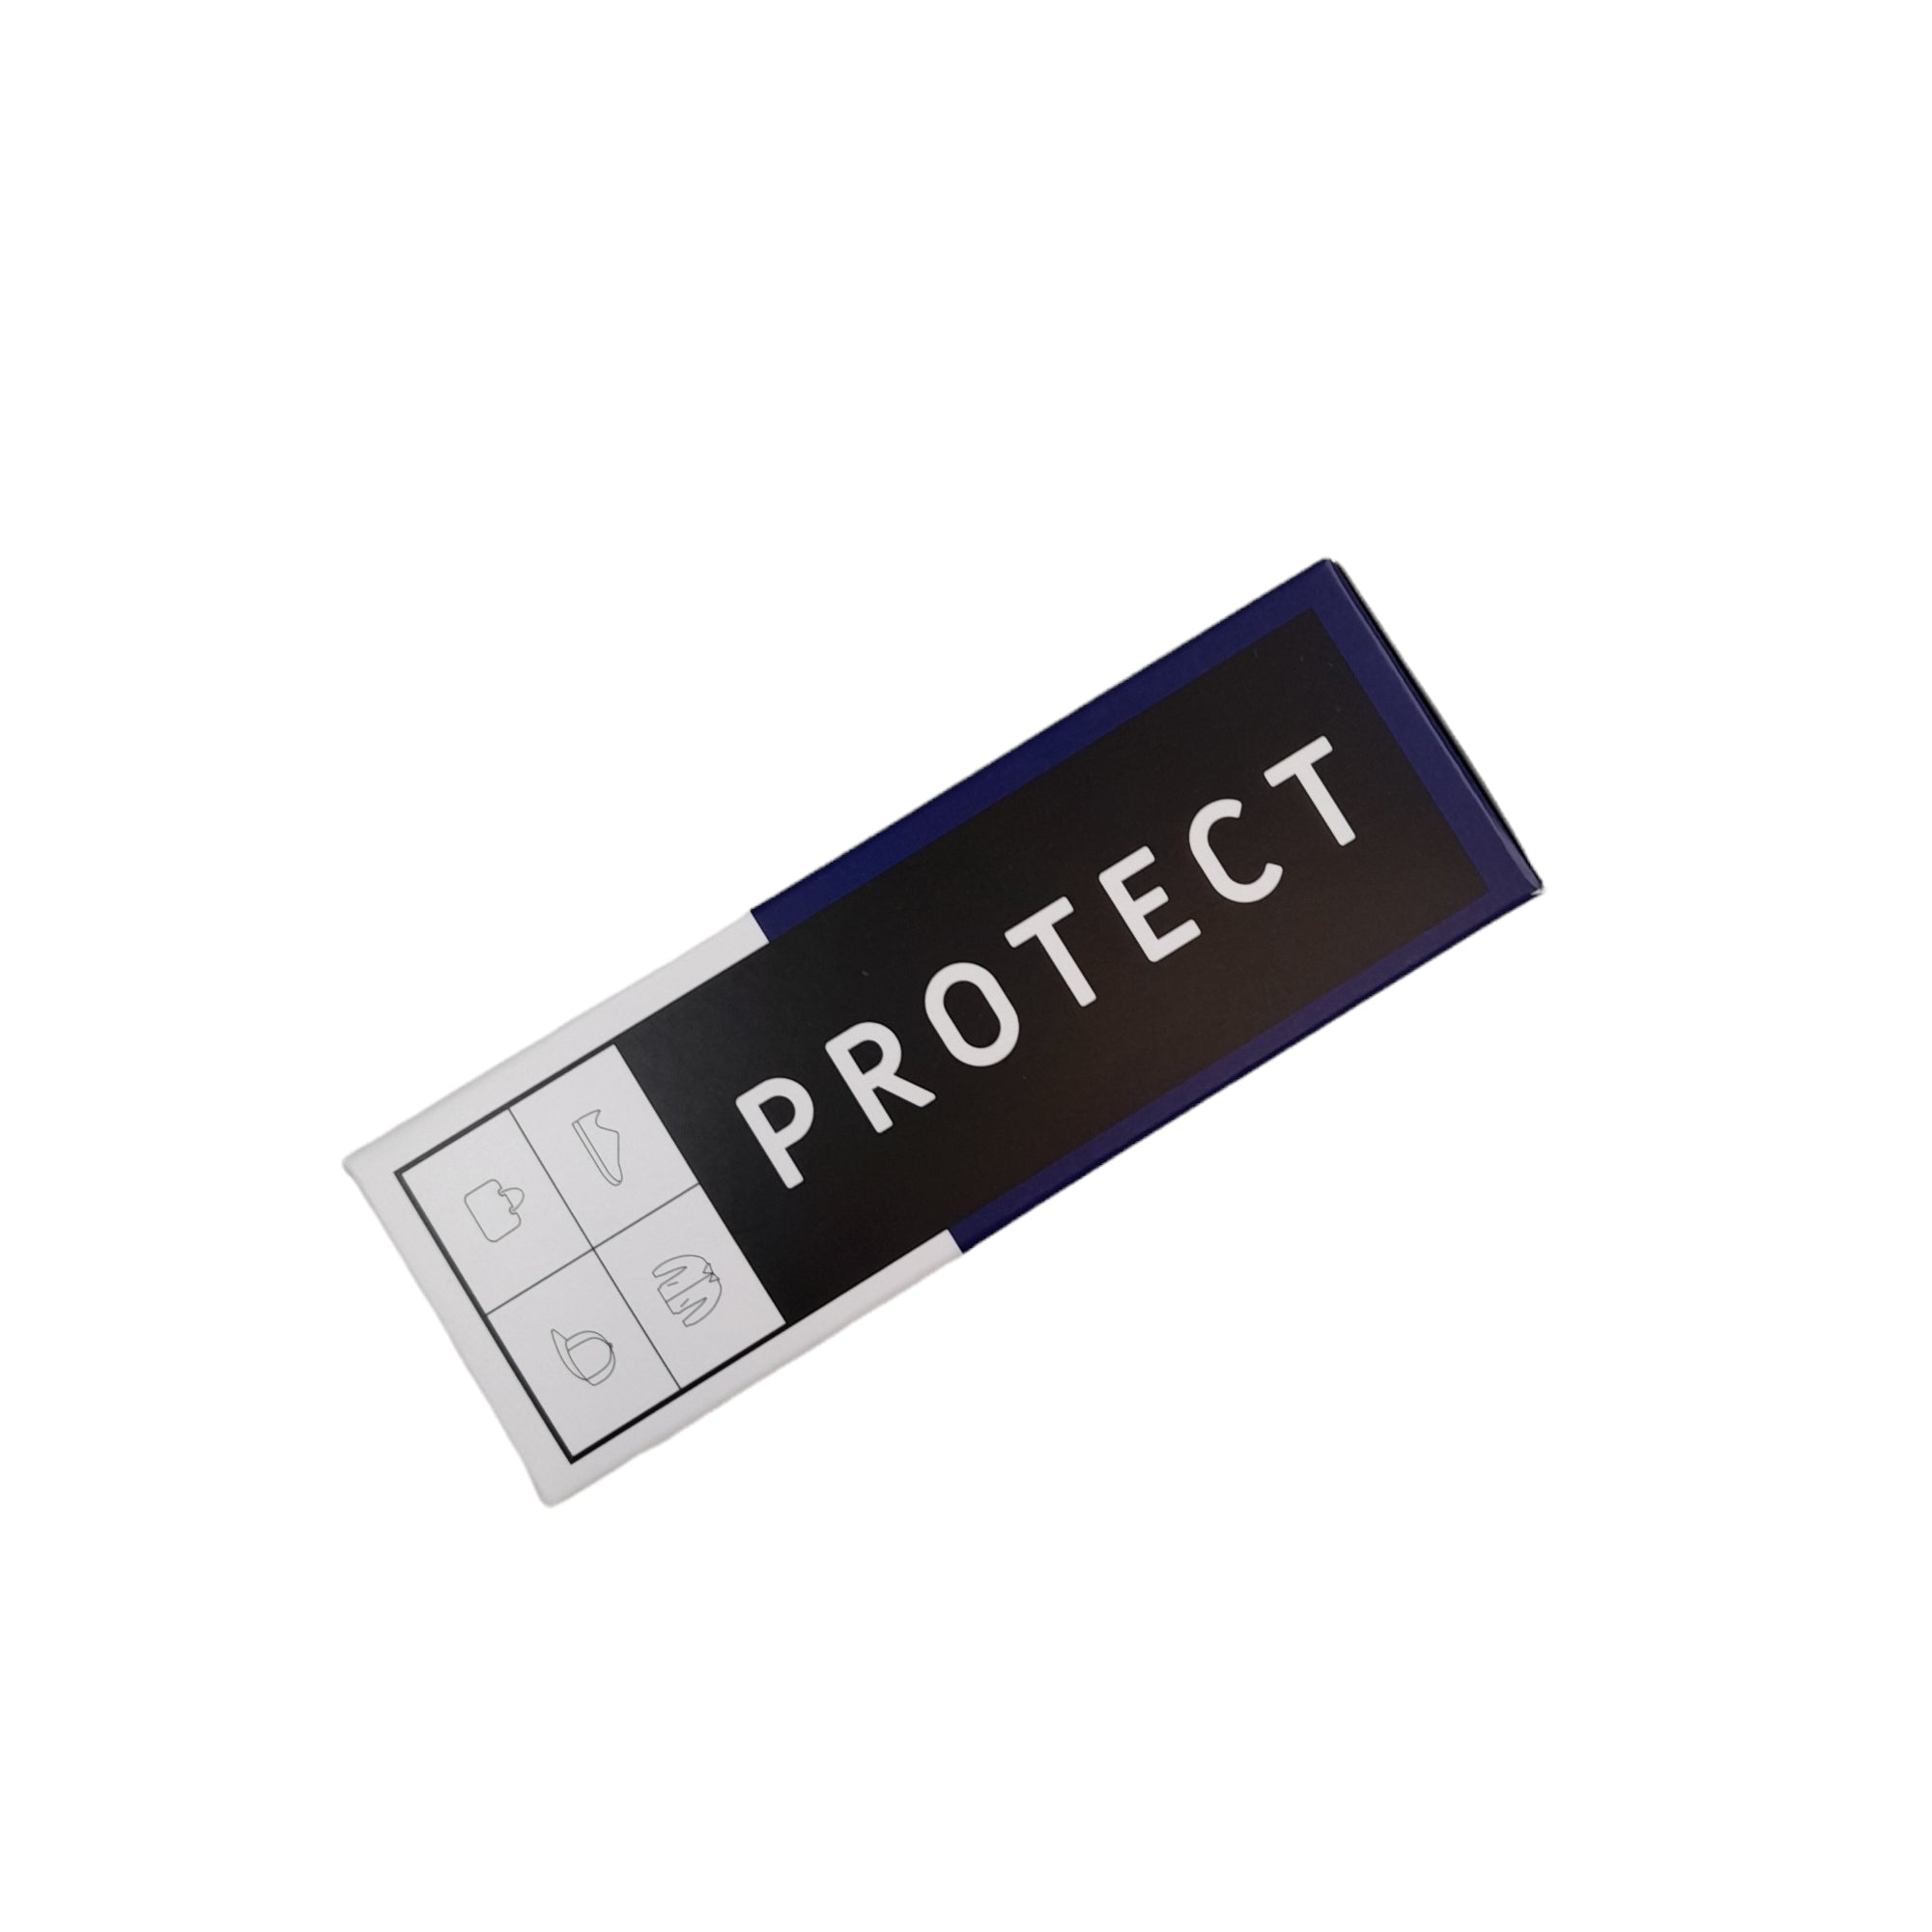 Protector - shoe&amp;me - Liquiproof LABS - Accessories/Products - Accessories/Products